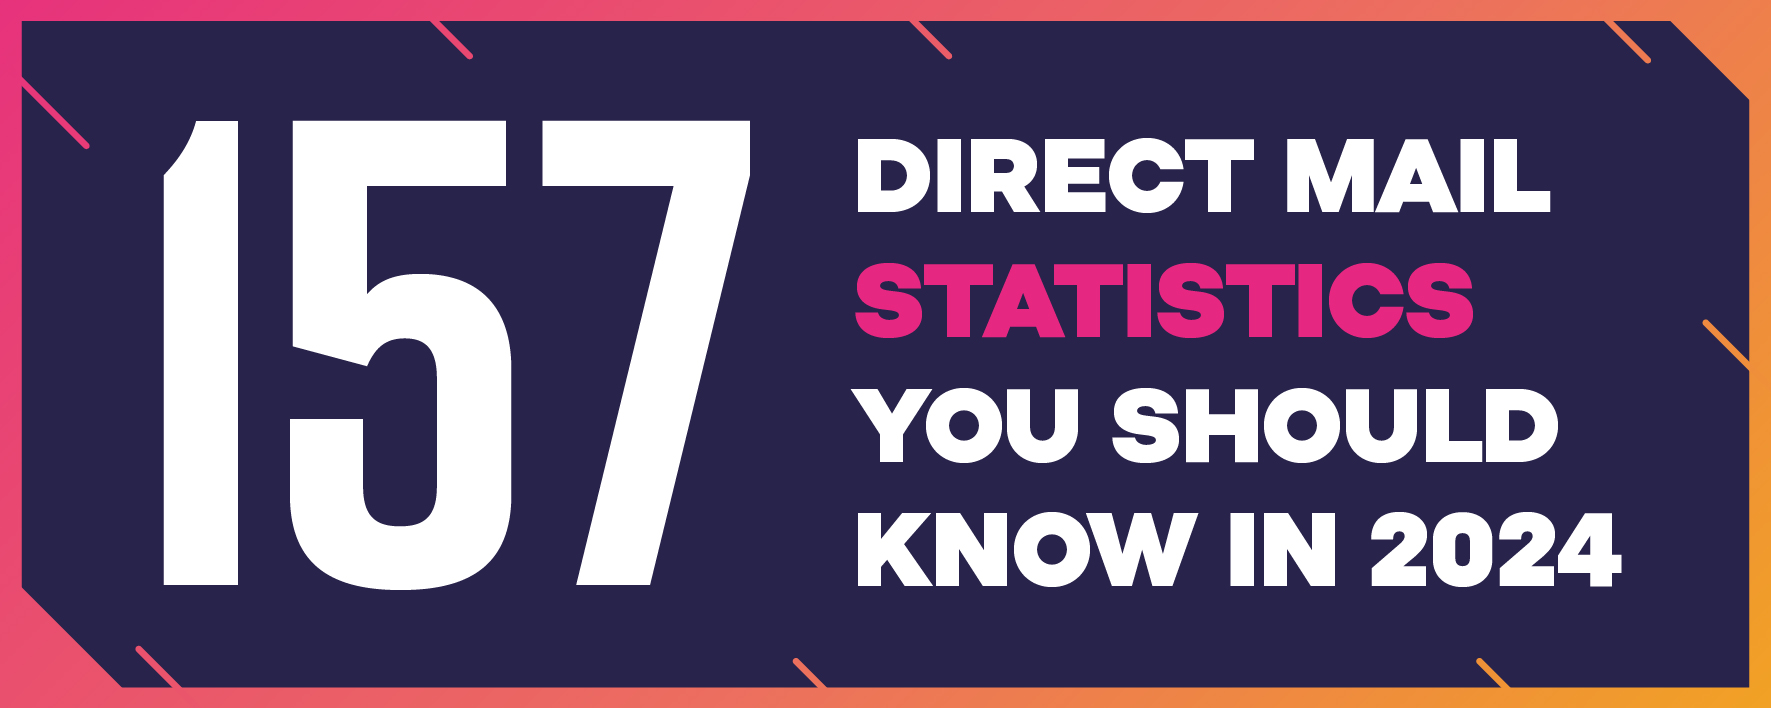 157 Direct Mail Statistics You Should Know in 2024